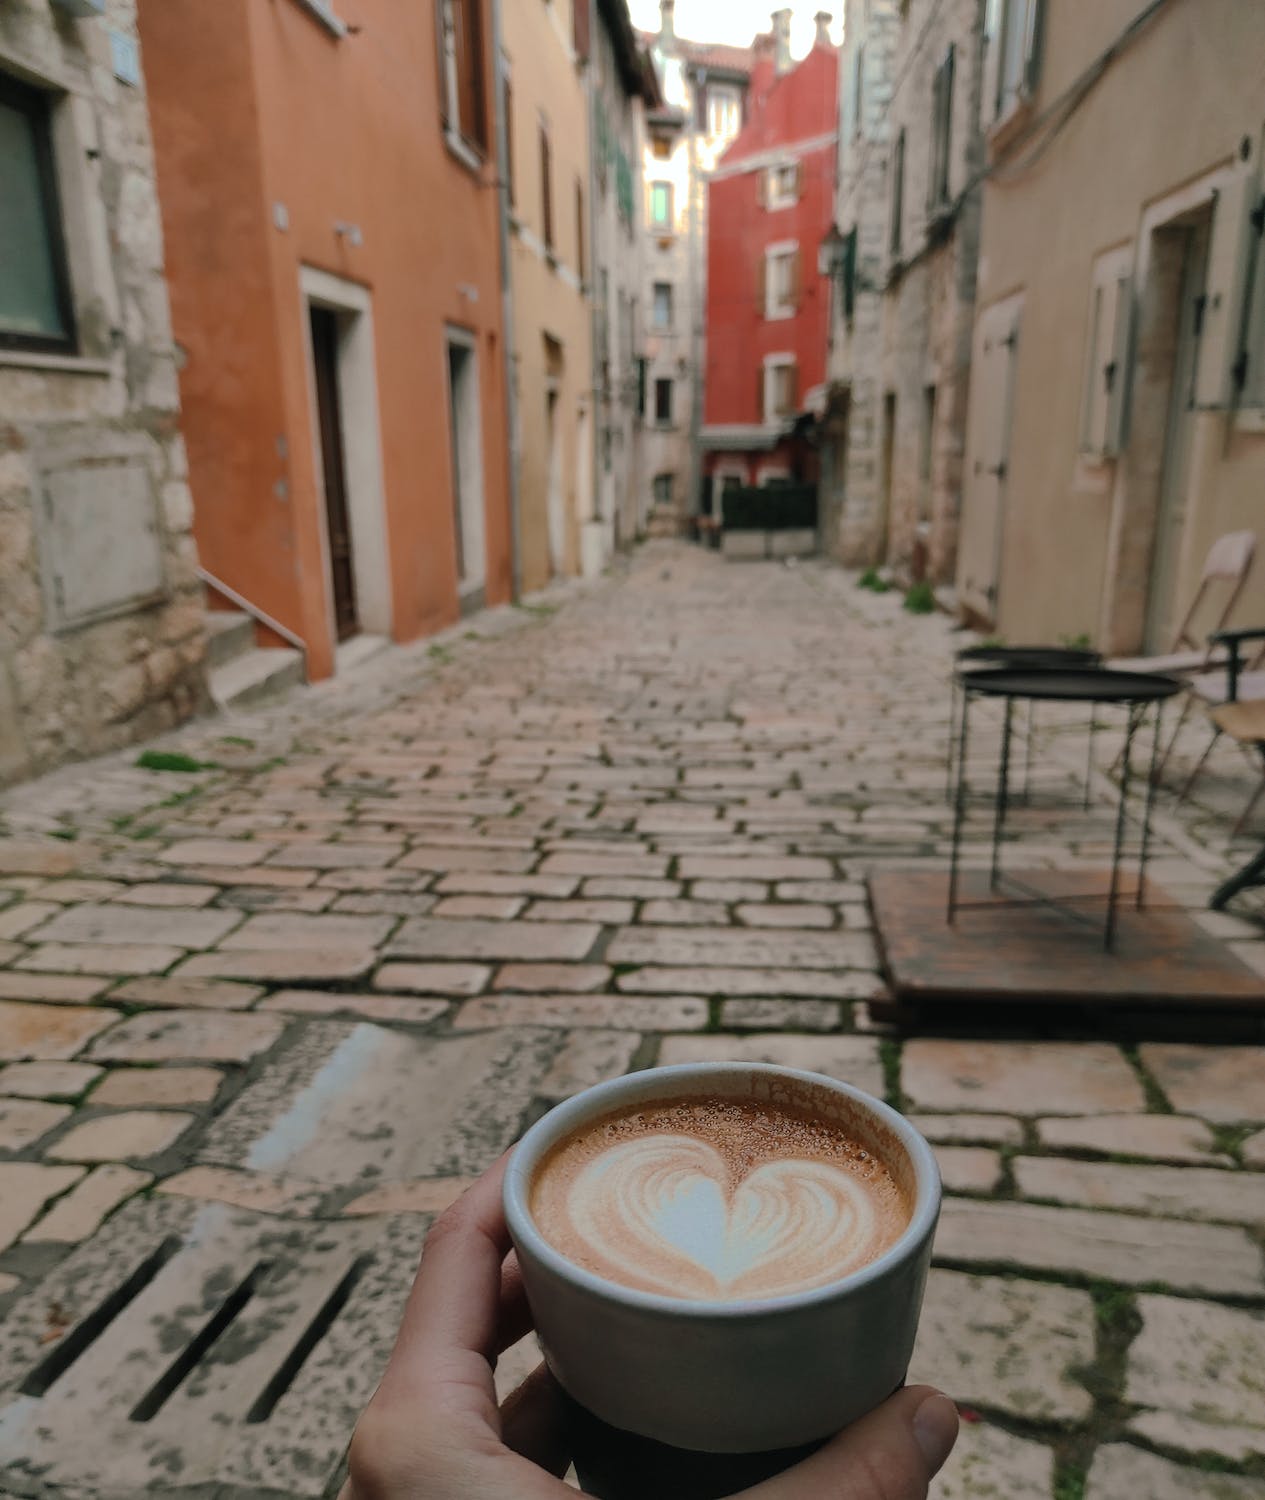 free-photo-of-a-person-holding-a-cup-of-coffee-in-front-of-a-cobblestone-street